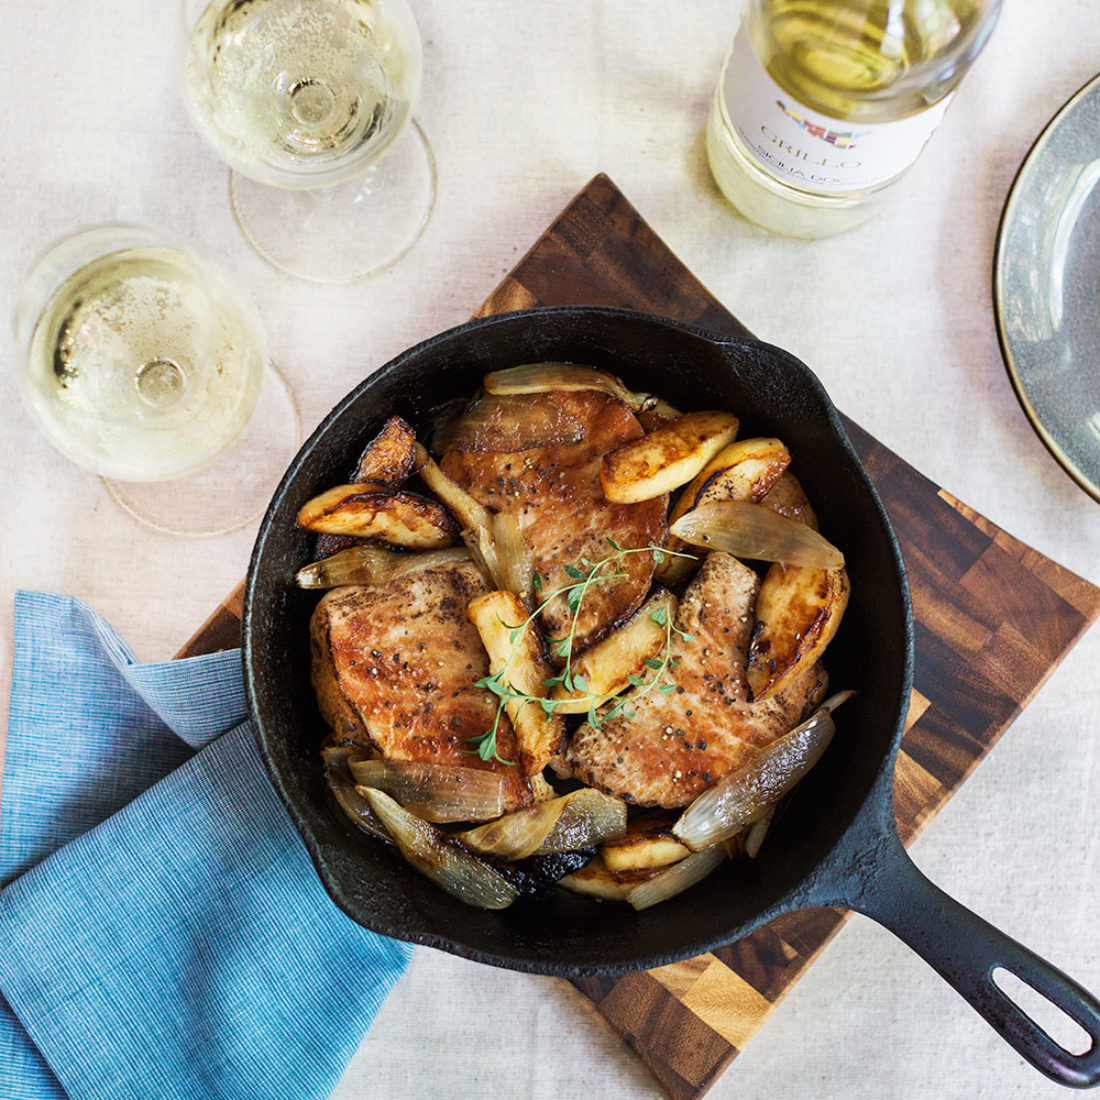 Pan Roasted Pork Chops with Apples and Onions